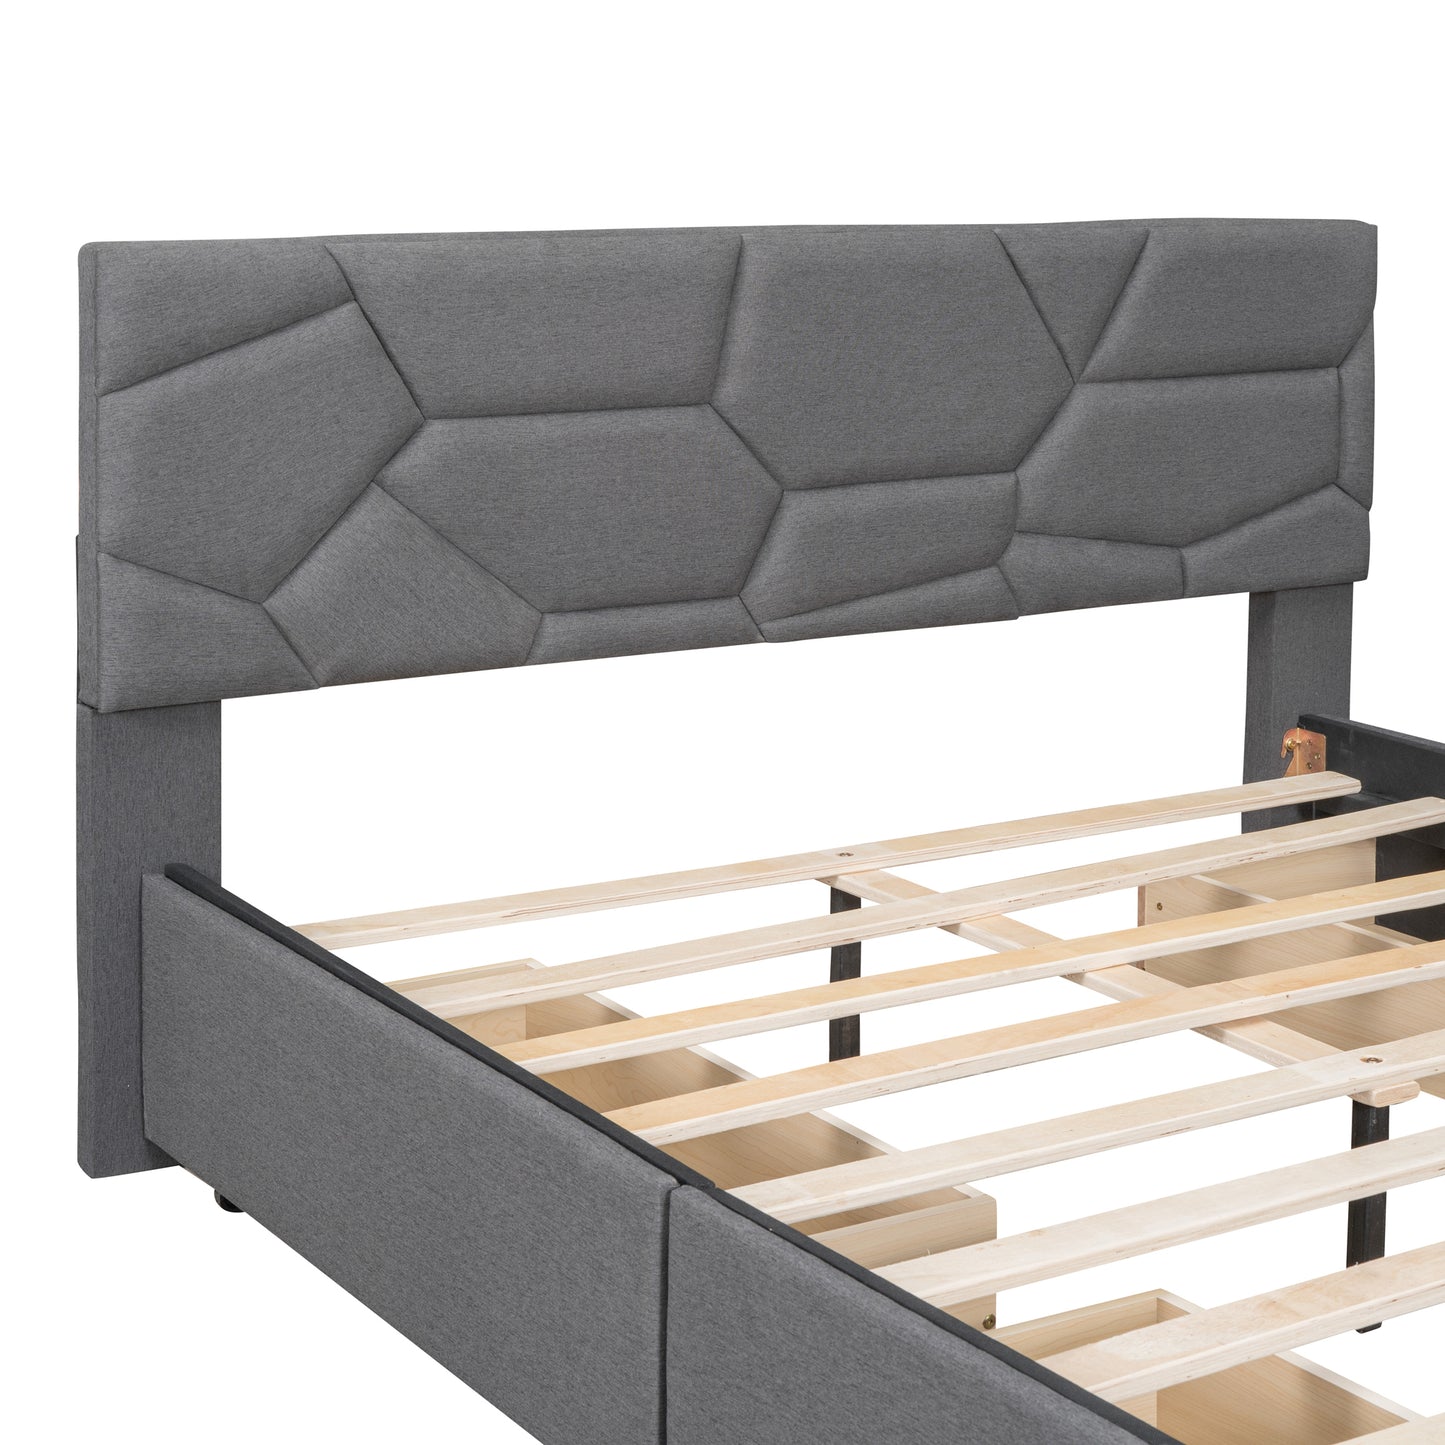 Queen Size Upholstered Platform Bed with Brick Pattern Headboard and 4 Drawers, Linen Fabric, Gray